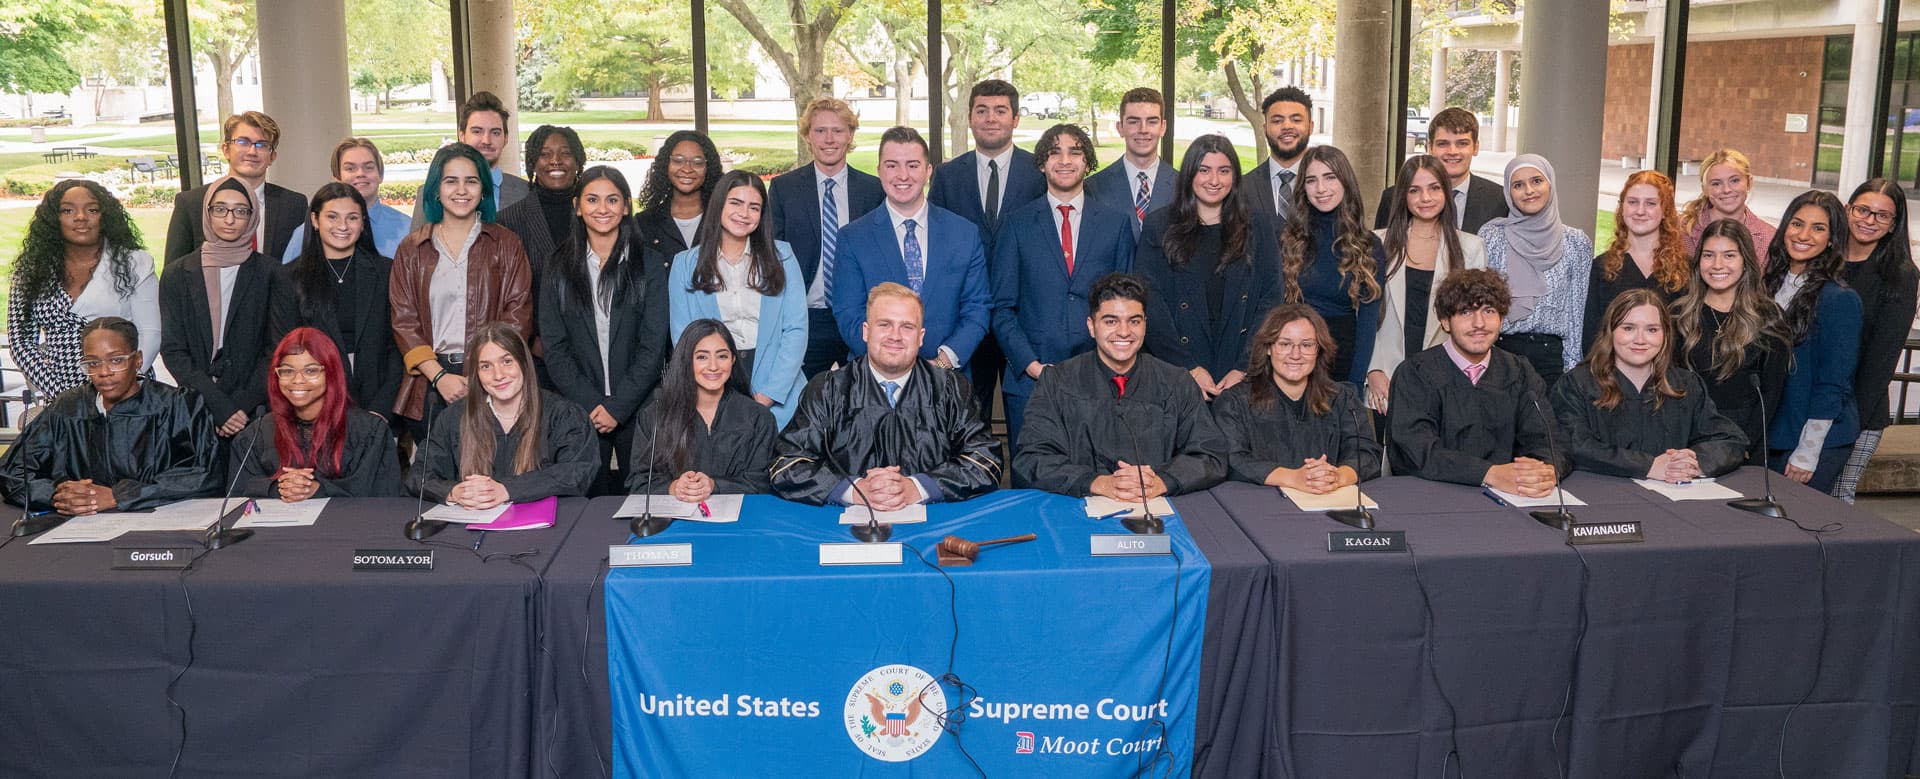 Students representing U.S. Supreme Court justices during a Moot Court simulation